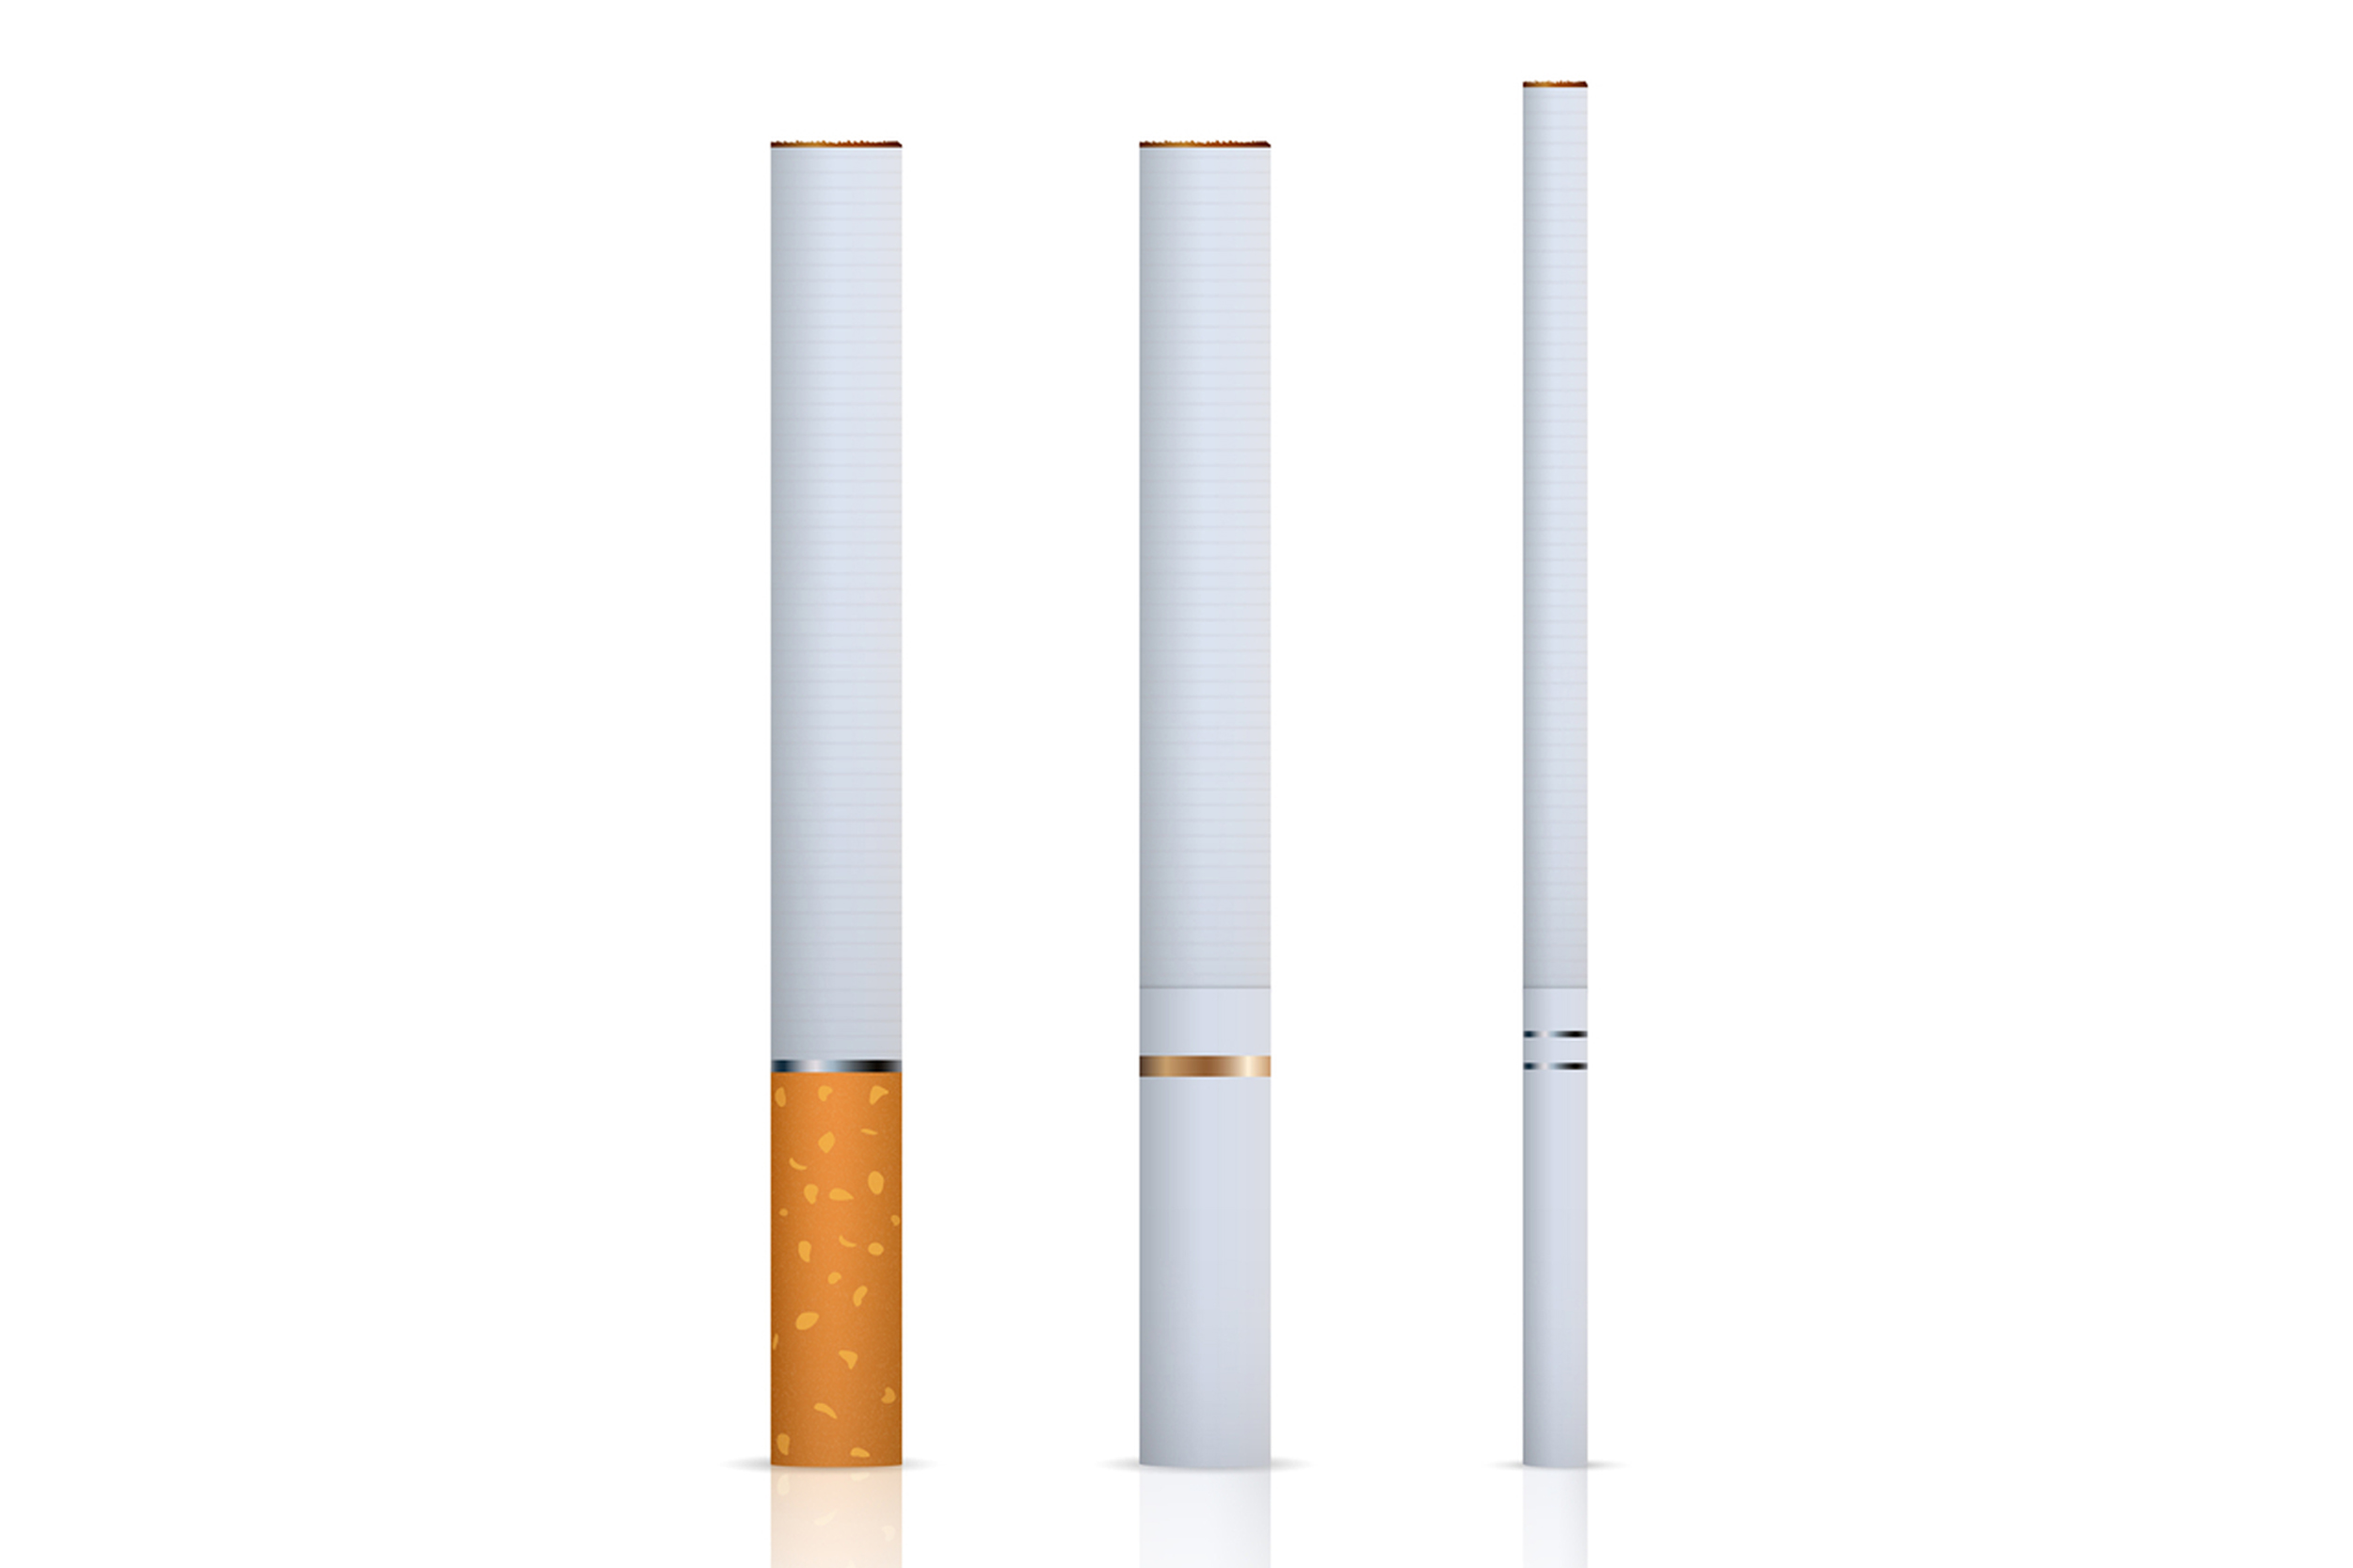 Types of cigarettes